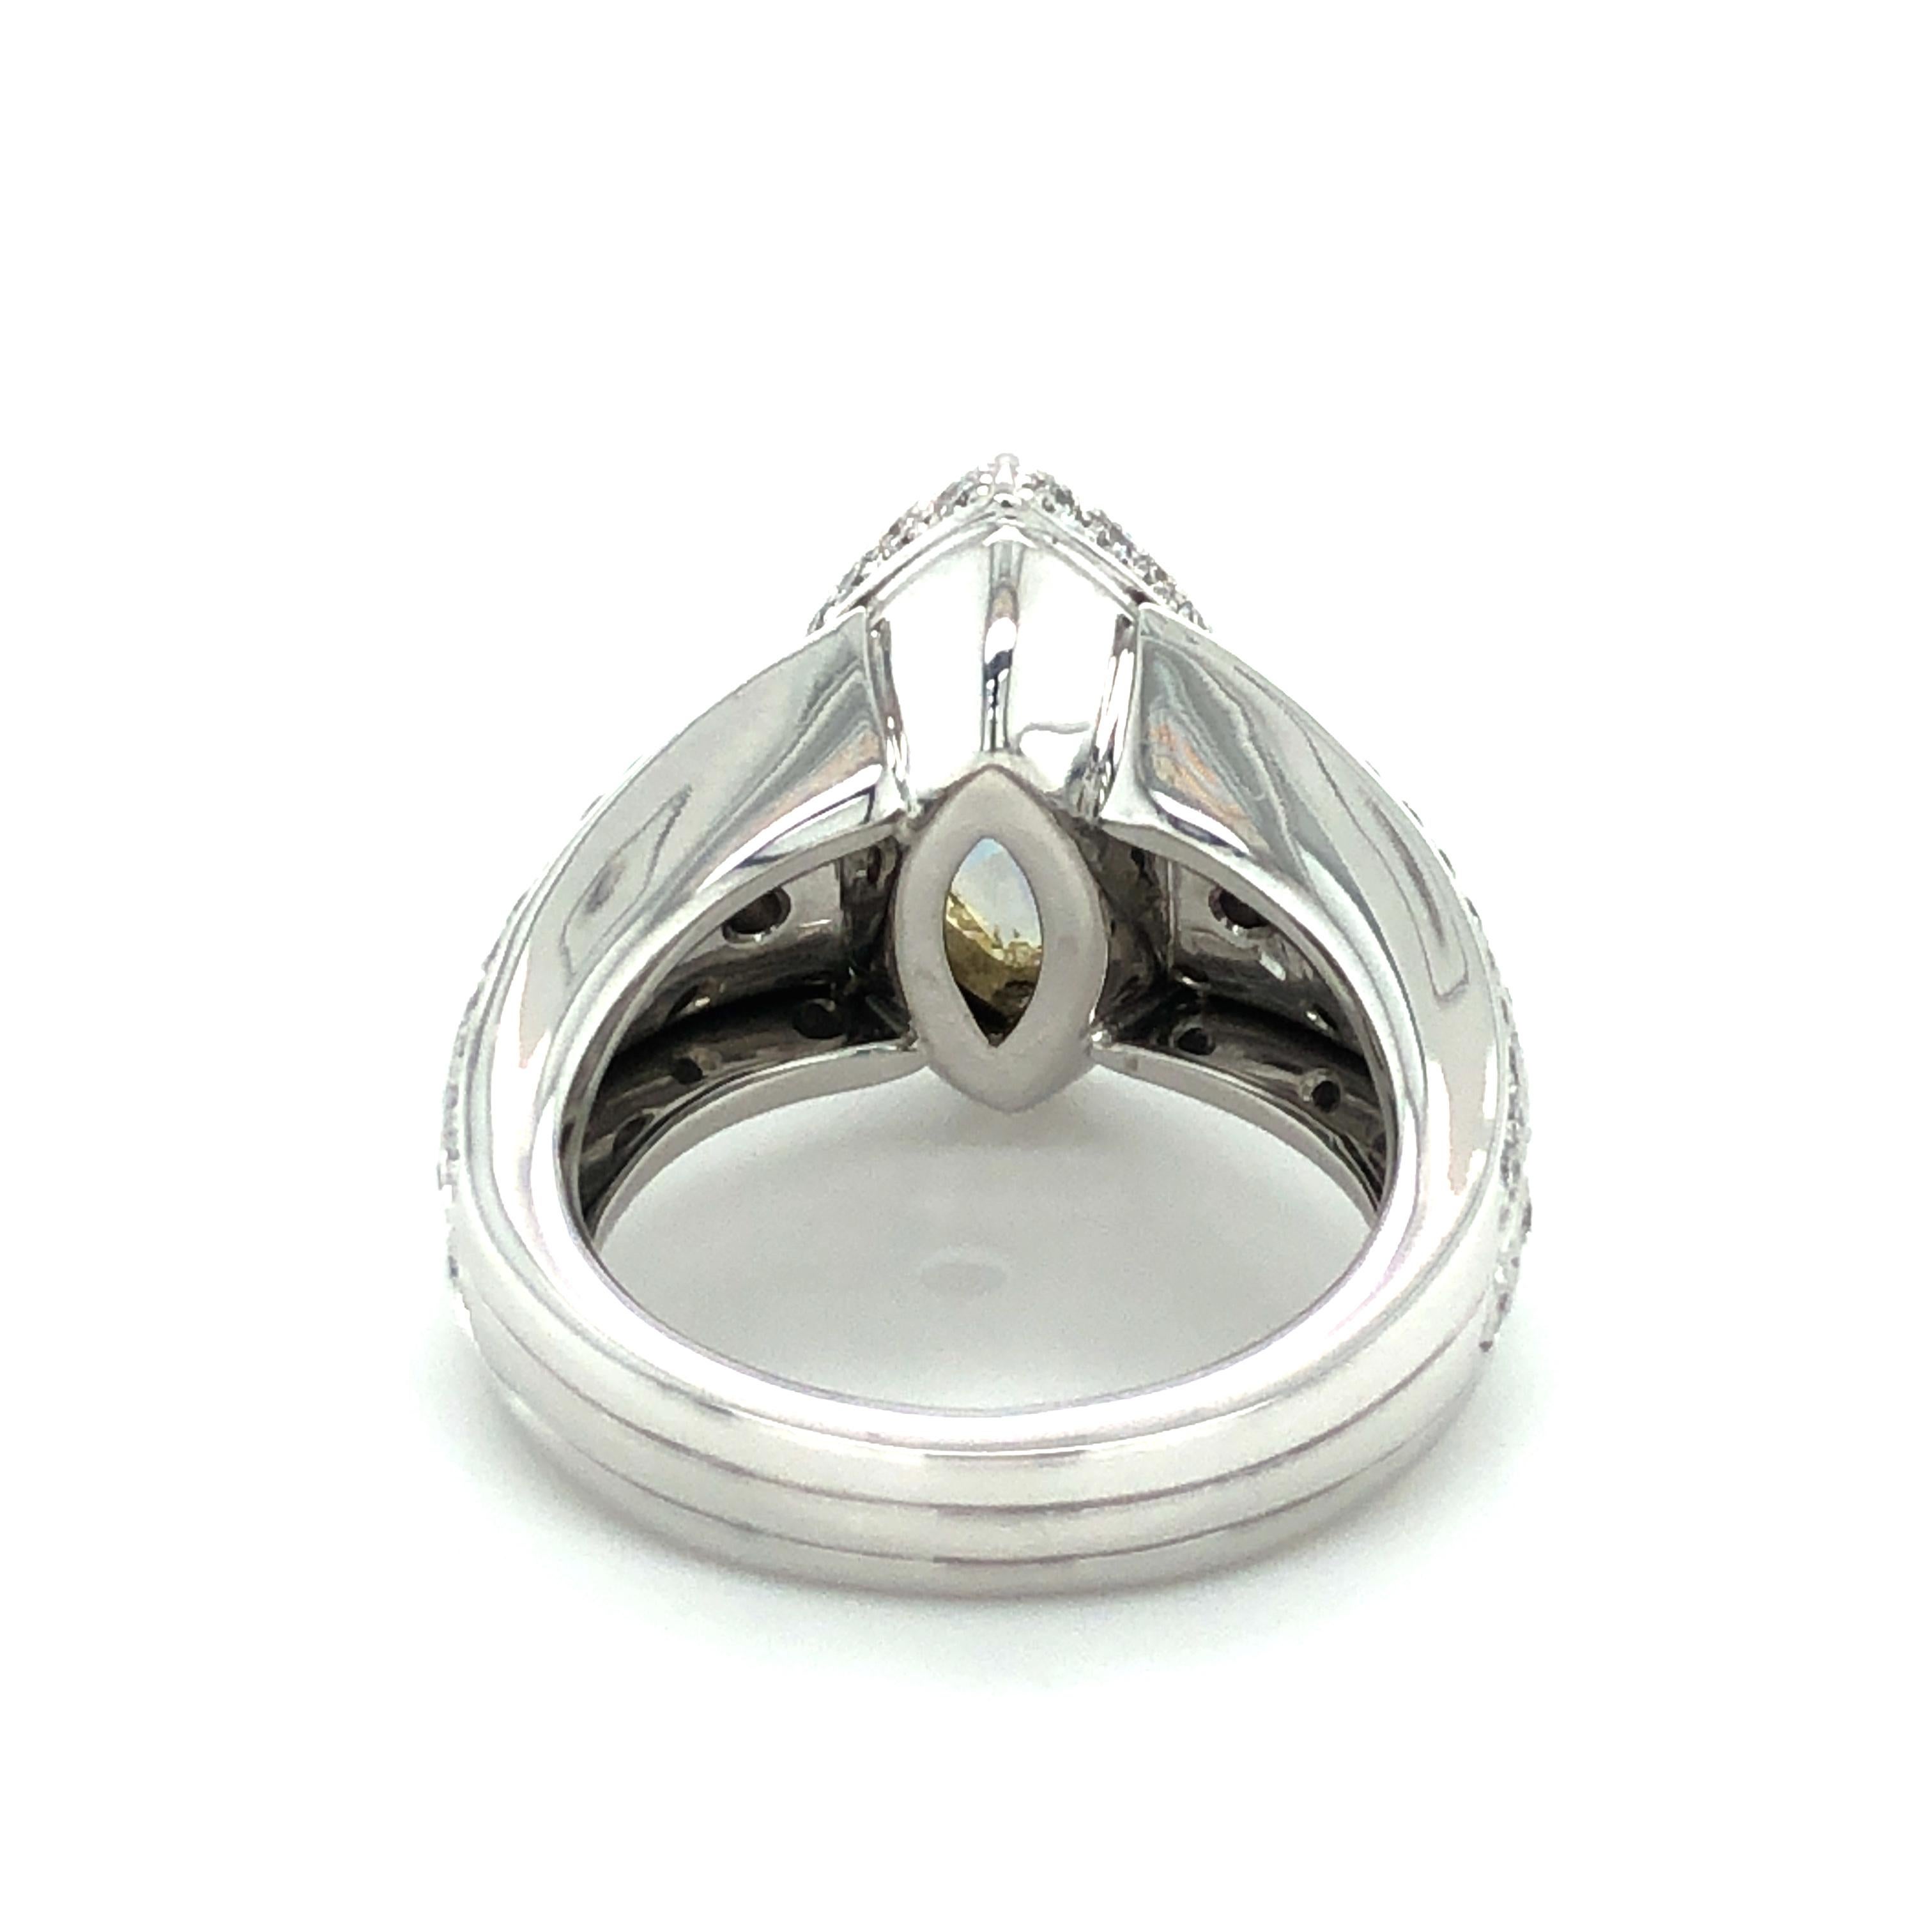 2.77 Carat Marquise-Cut Diamond Ring by Avalon Swiss in 18 Karat White Gold For Sale 2